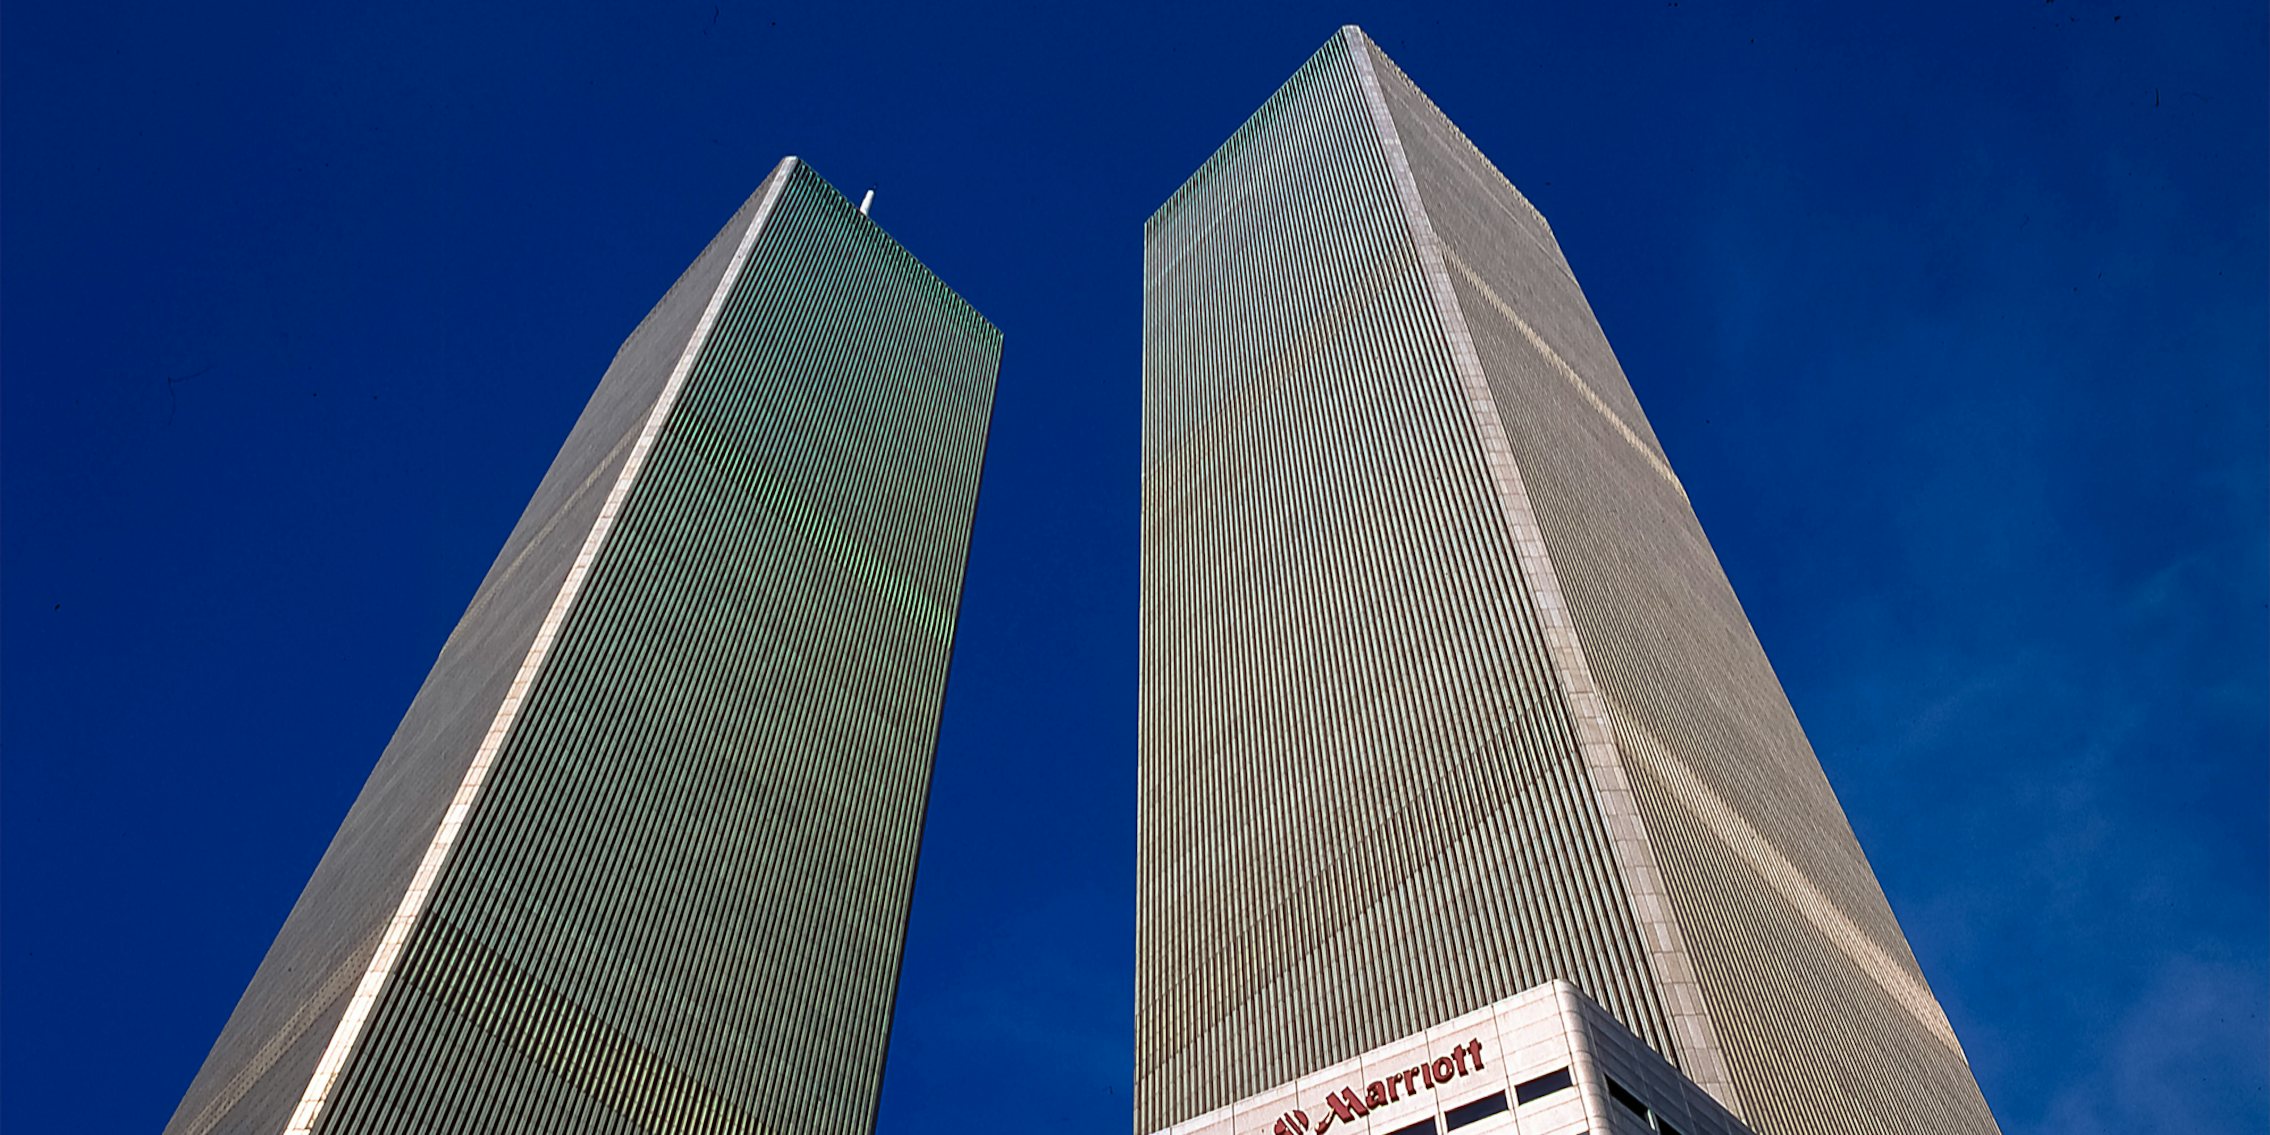 May 27, 2001 View of the Twin Towers and Marriott Hotel